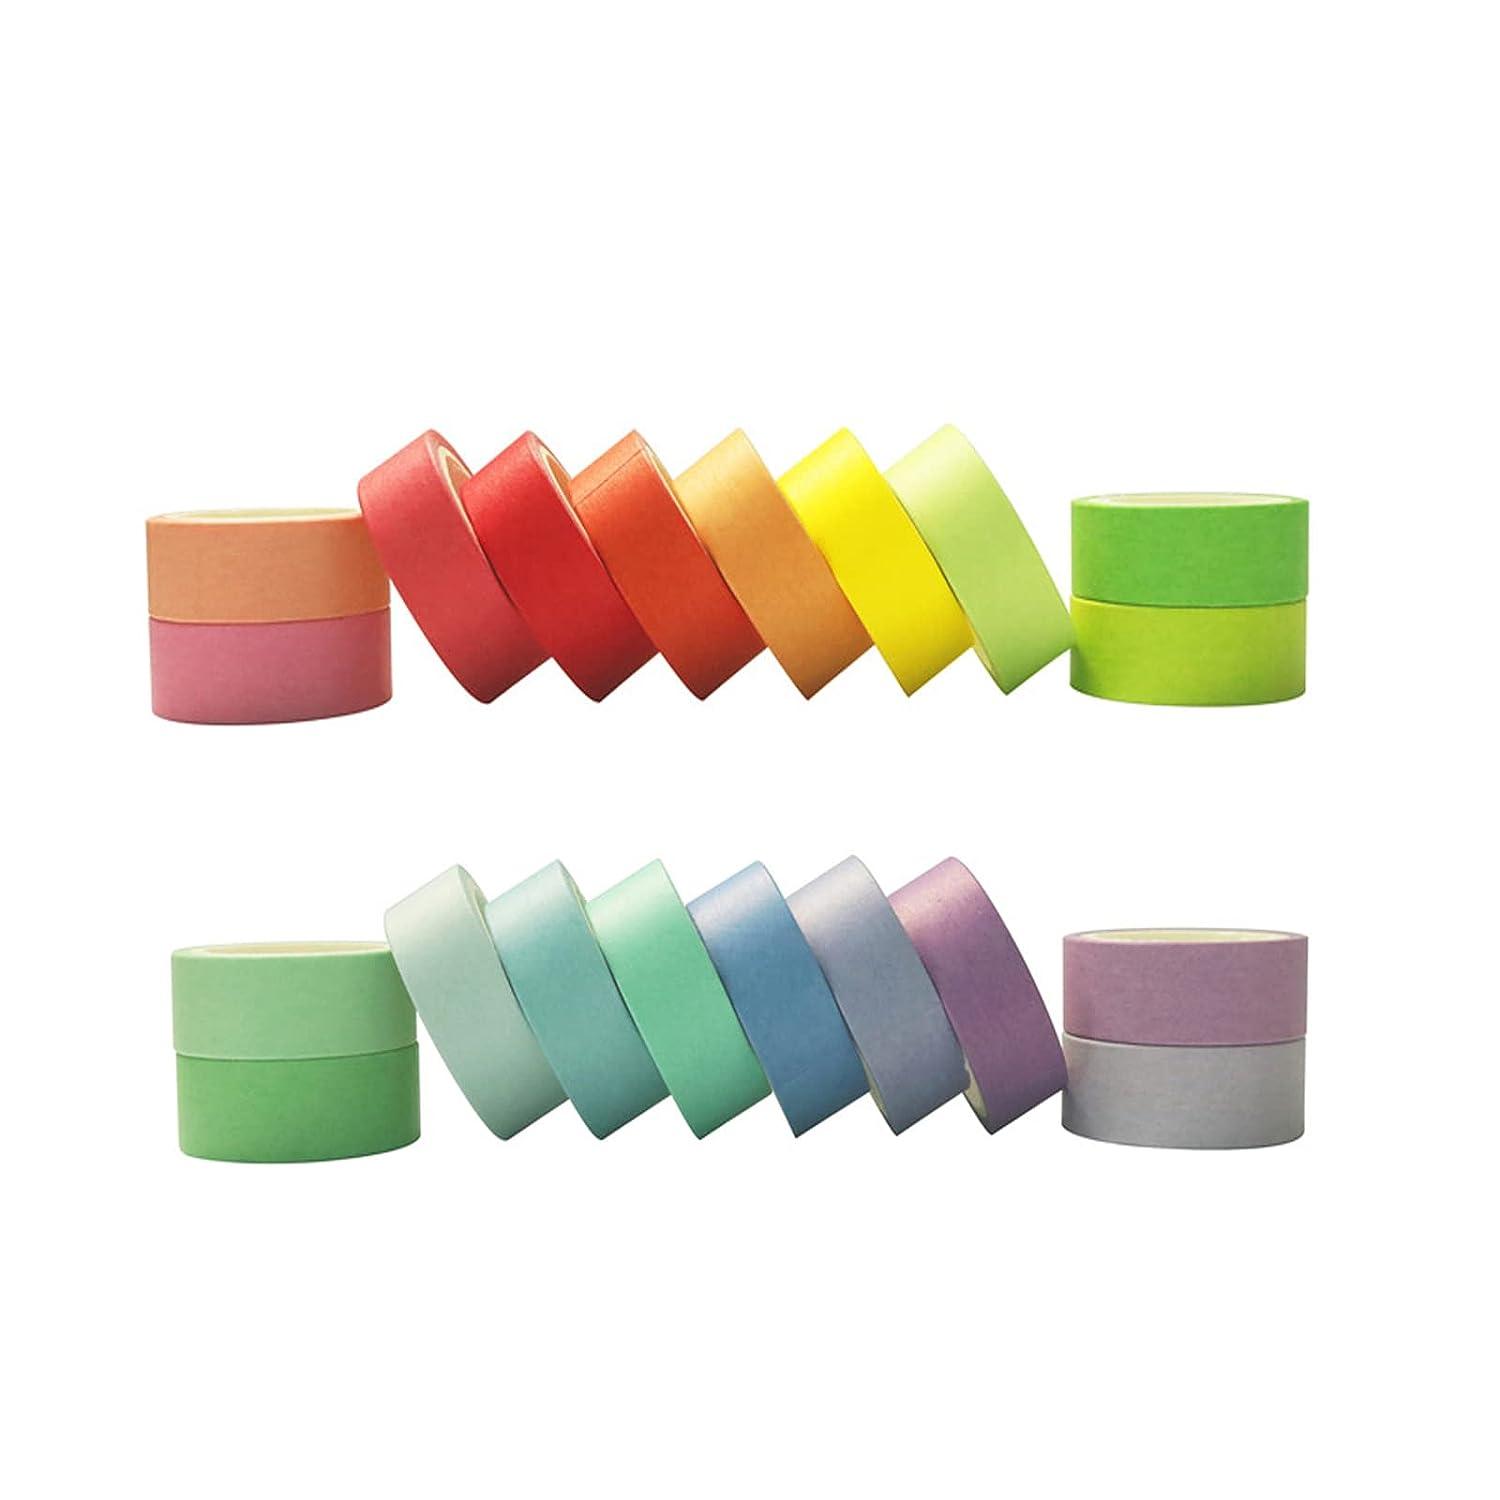 Baijixin Colored Masking Tape - 12 Colors 12mm x10m, 12 Rolls, Clear